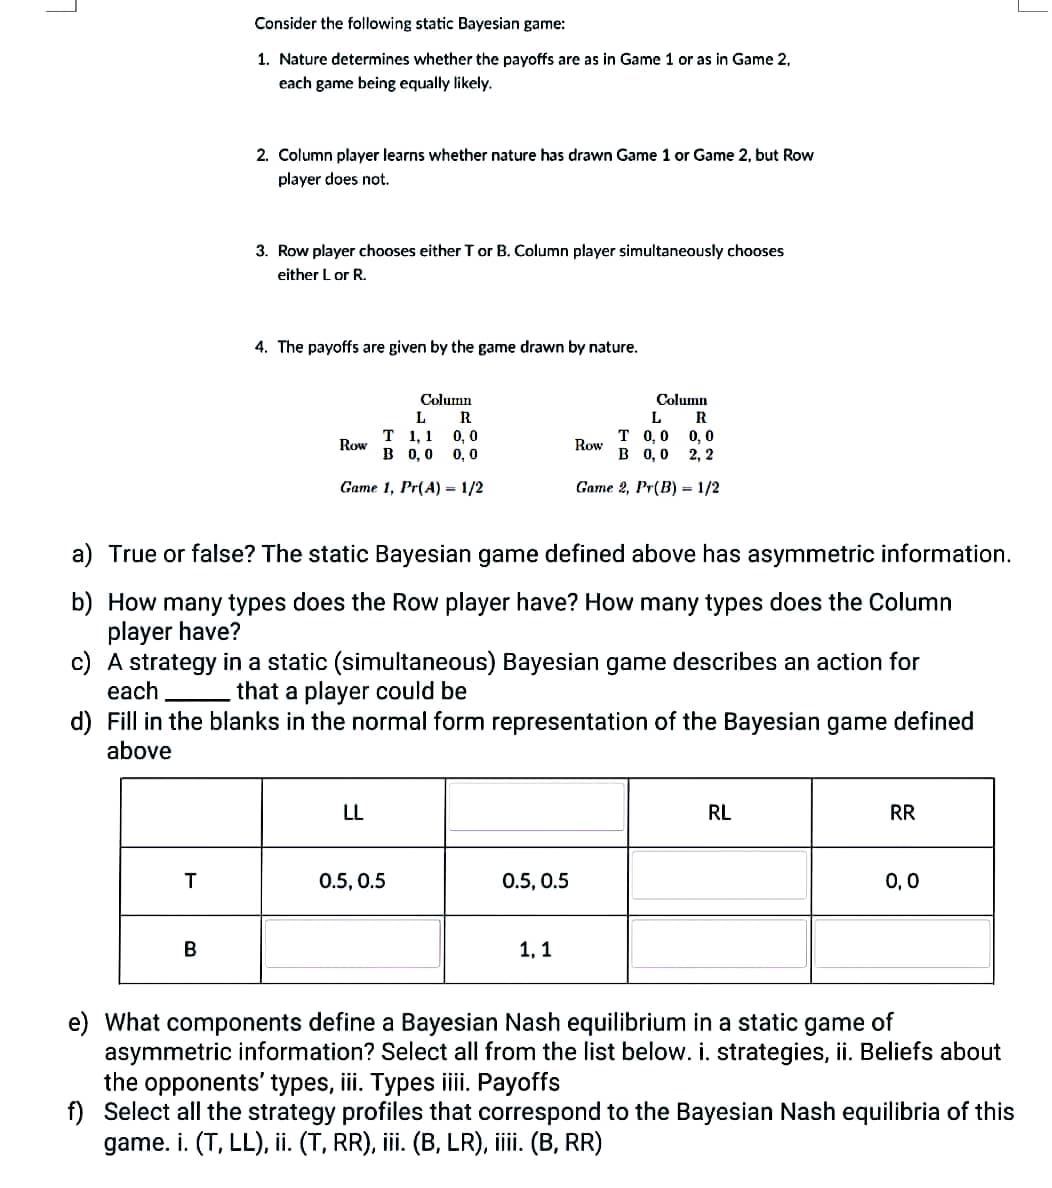 7
Consider the following static Bayesian game:
1. Nature determines whether the payoffs are as in Game 1 or as in Game 2,
each game being equally likely.
T
2. Column player learns whether nature has drawn Game 1 or Game 2, but Row
player does not.
B
3. Row player chooses either T or B. Column player simultaneously chooses
either L or R.
4. The payoffs are given by the game drawn by nature.
Column
L
R
T 1,1 0, 0
B 0,0 0,0
Game 1, Pr(A) = 1/2
Row
a) True or false? The static Bayesian game defined above has asymmetric information.
b) How many types does the Row player have? How many types does the Column
player have?
c) A strategy in a static (simultaneous) Bayesian game describes an action for
each
that a player could be
d) Fill in the blanks in the normal form representation of the Bayesian game defined
above
LL
0.5, 0.5
Column
L
R
T 0,0
0,0
B 0,0 2, 2
Game 2, Pr(B) = 1/2
0.5, 0.5
Row
1,1
RL
RR
0,0
J
e) What components define a Bayesian Nash equilibrium in a static game of
asymmetric information? Select all from the list below. i. strategies, ii. Beliefs about
the opponents' types, iii. Types iiii. Payoffs
f) Select all the strategy profiles that correspond to the Bayesian Nash equilibria of this
game. i. (T, LL), ii. (T, RR), iii. (B, LR), iiii. (B, RR)